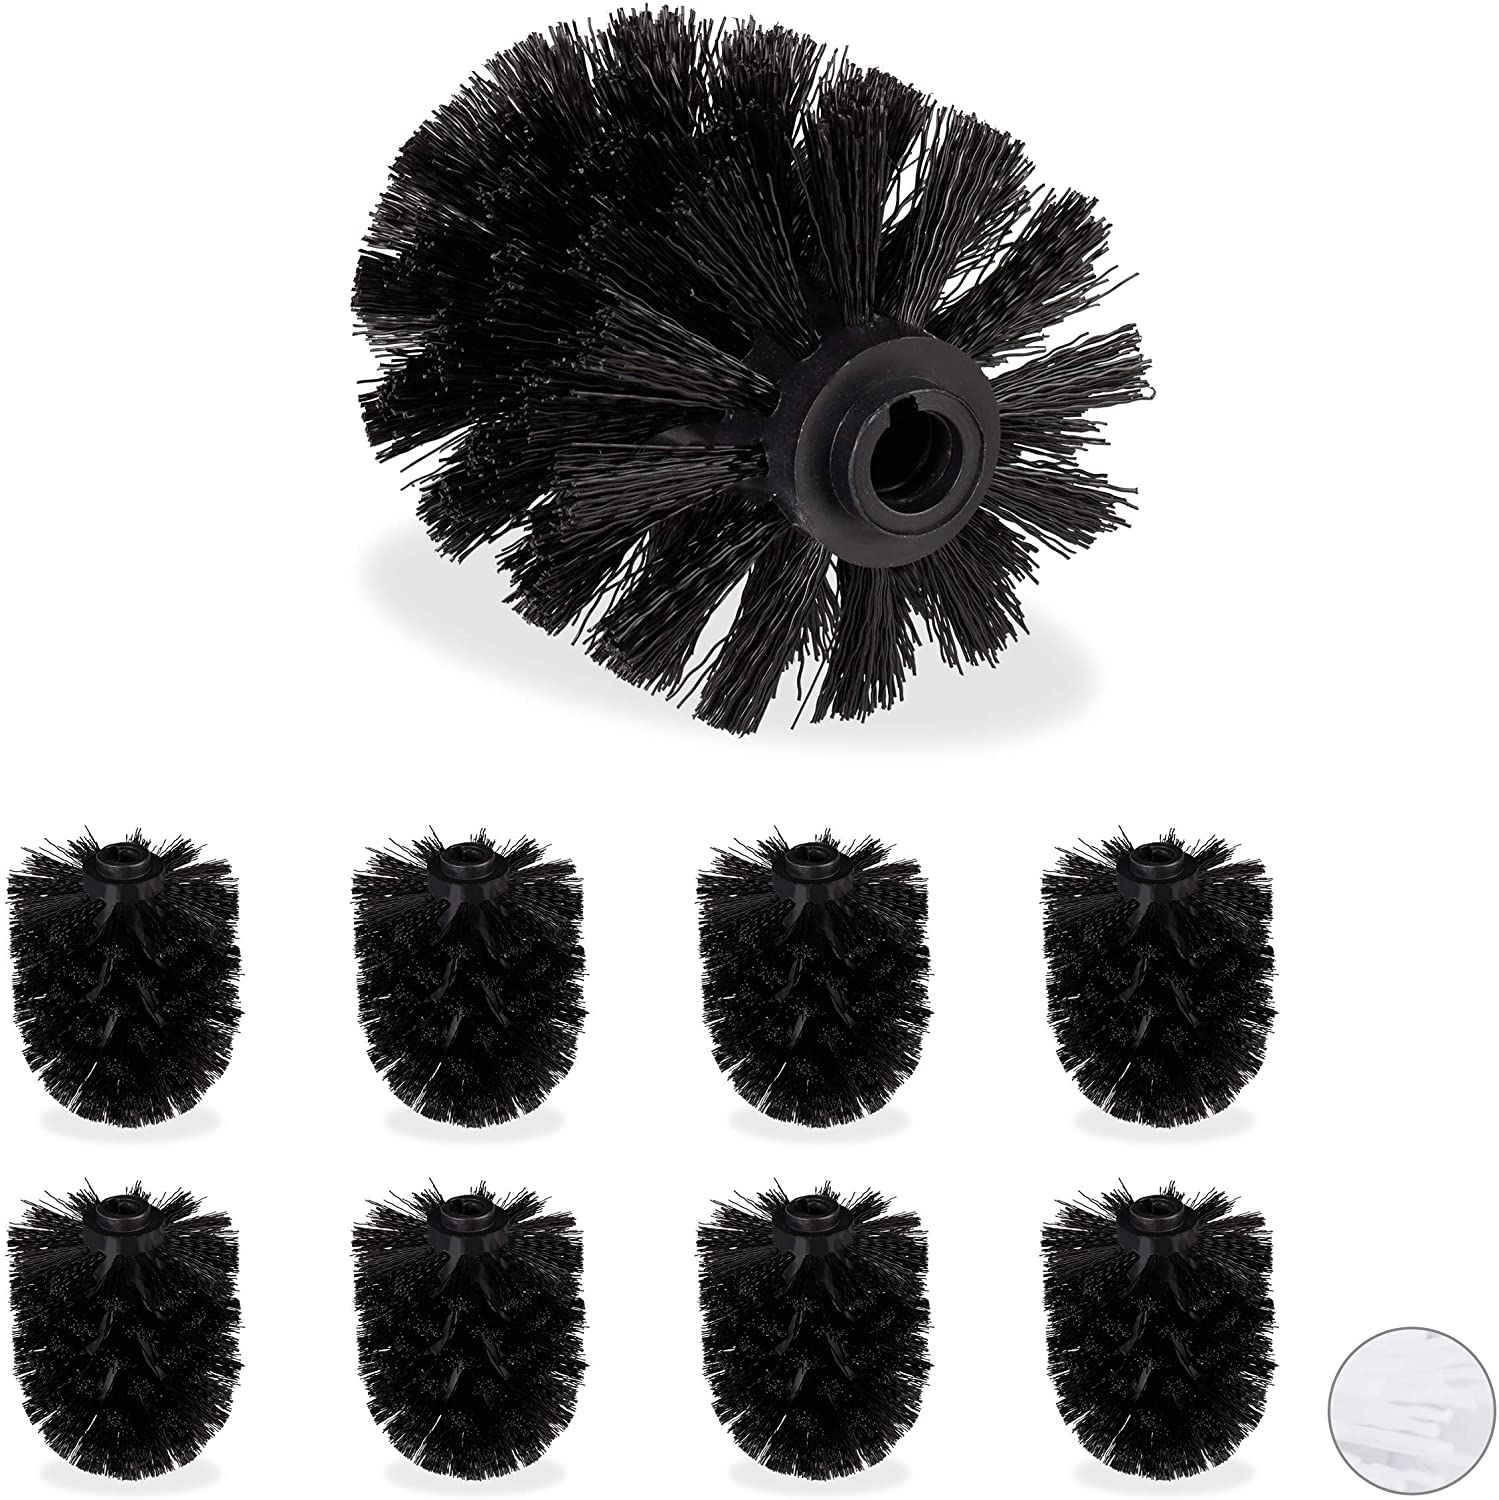 Relaxdays Replacement Toilet Brush Head For Toilet Brush, Set Of 9, Replace